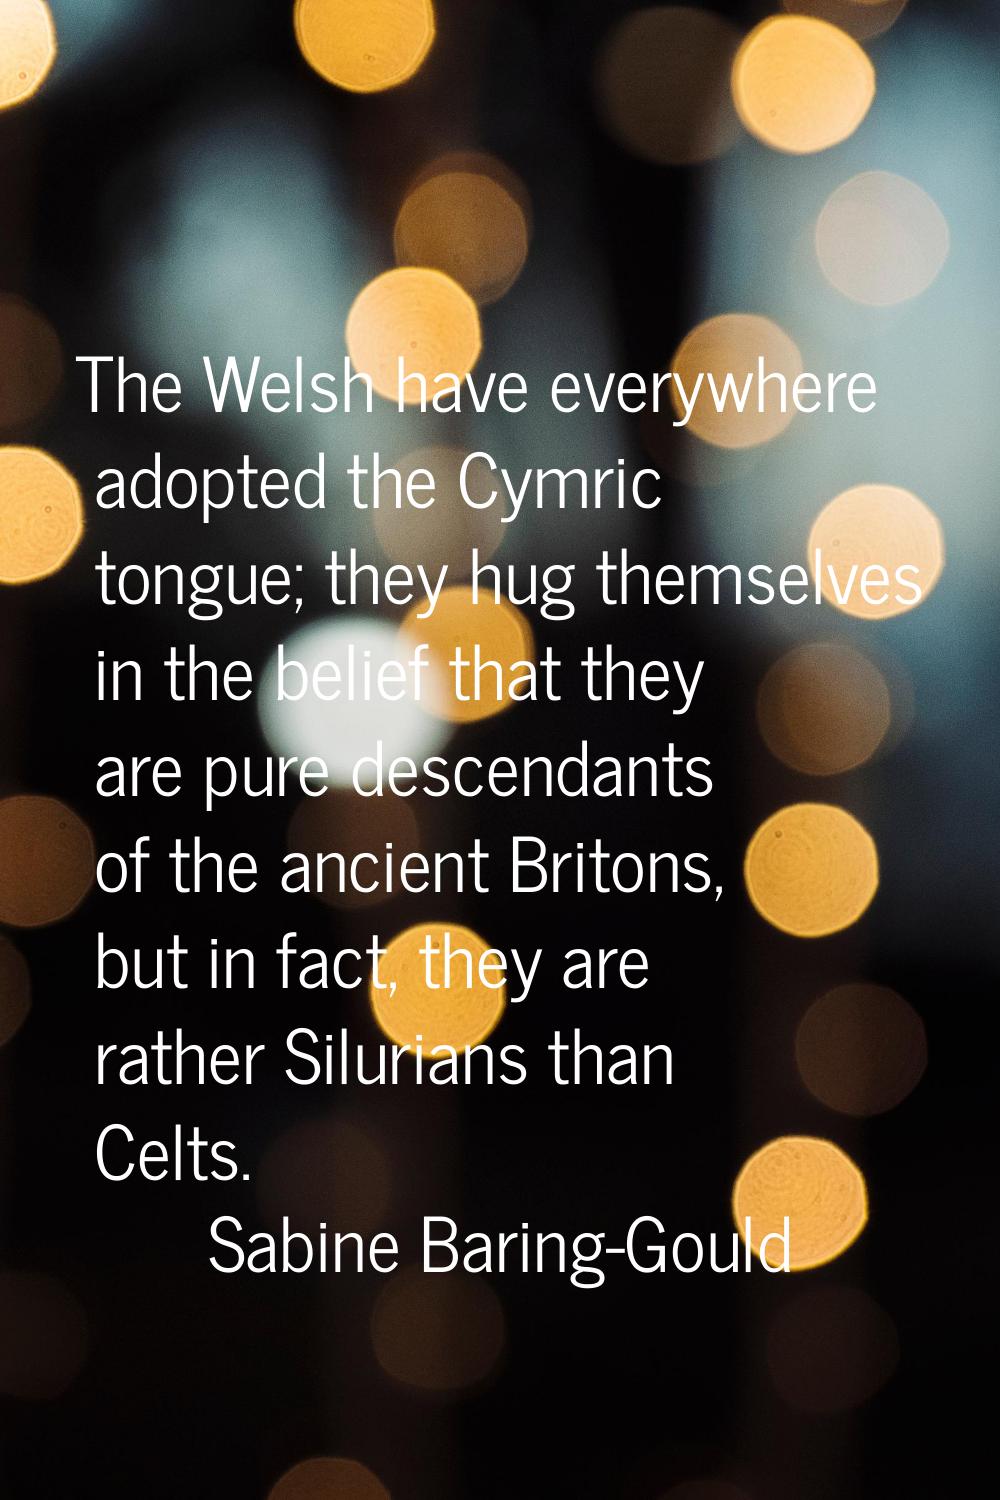 The Welsh have everywhere adopted the Cymric tongue; they hug themselves in the belief that they ar